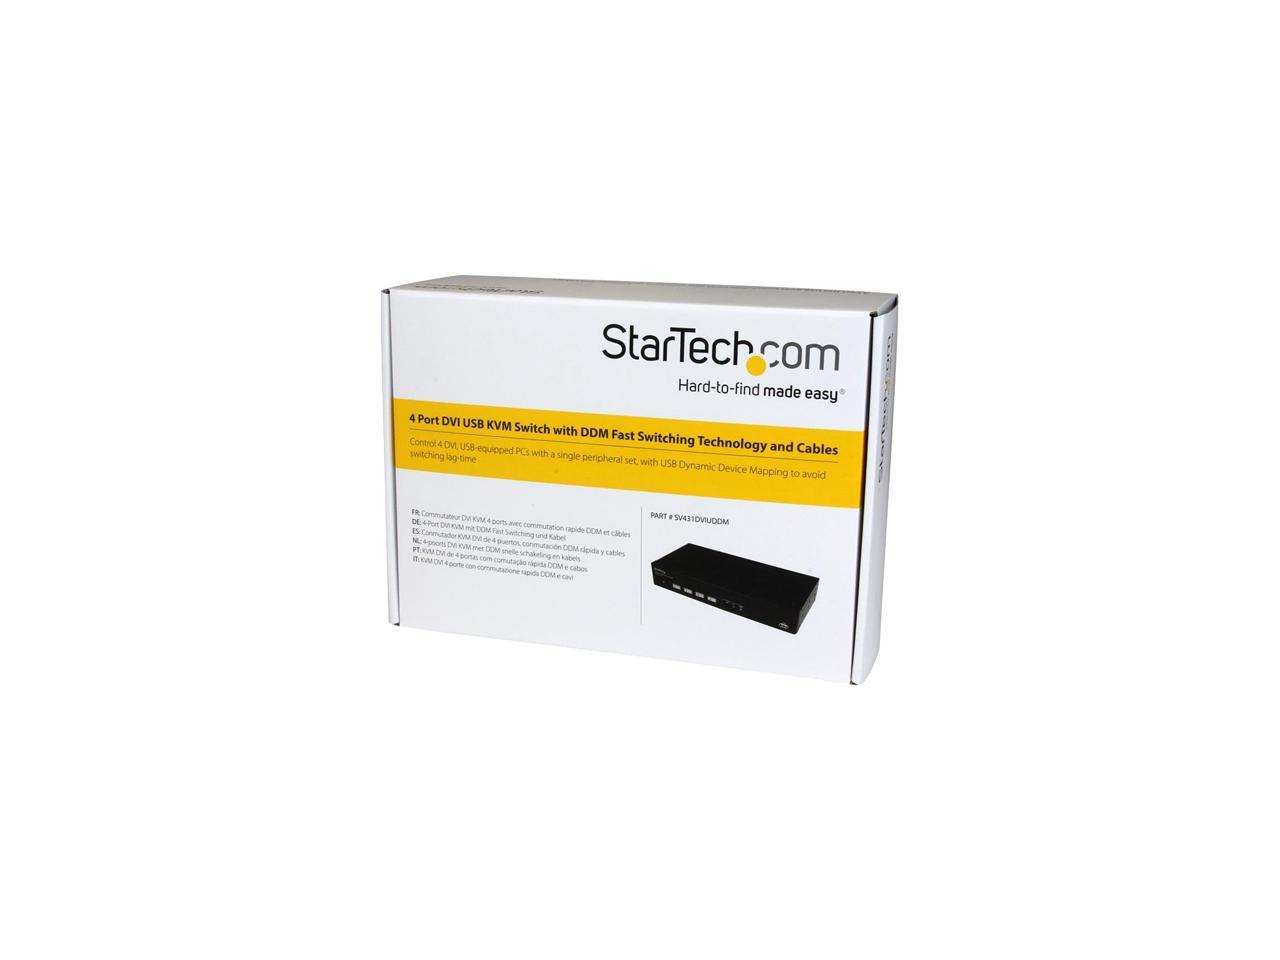 StarTech SV431DVIUDDM 4 Port USB DVI KVM Switch with DDM Fast Switching Technology and Cables